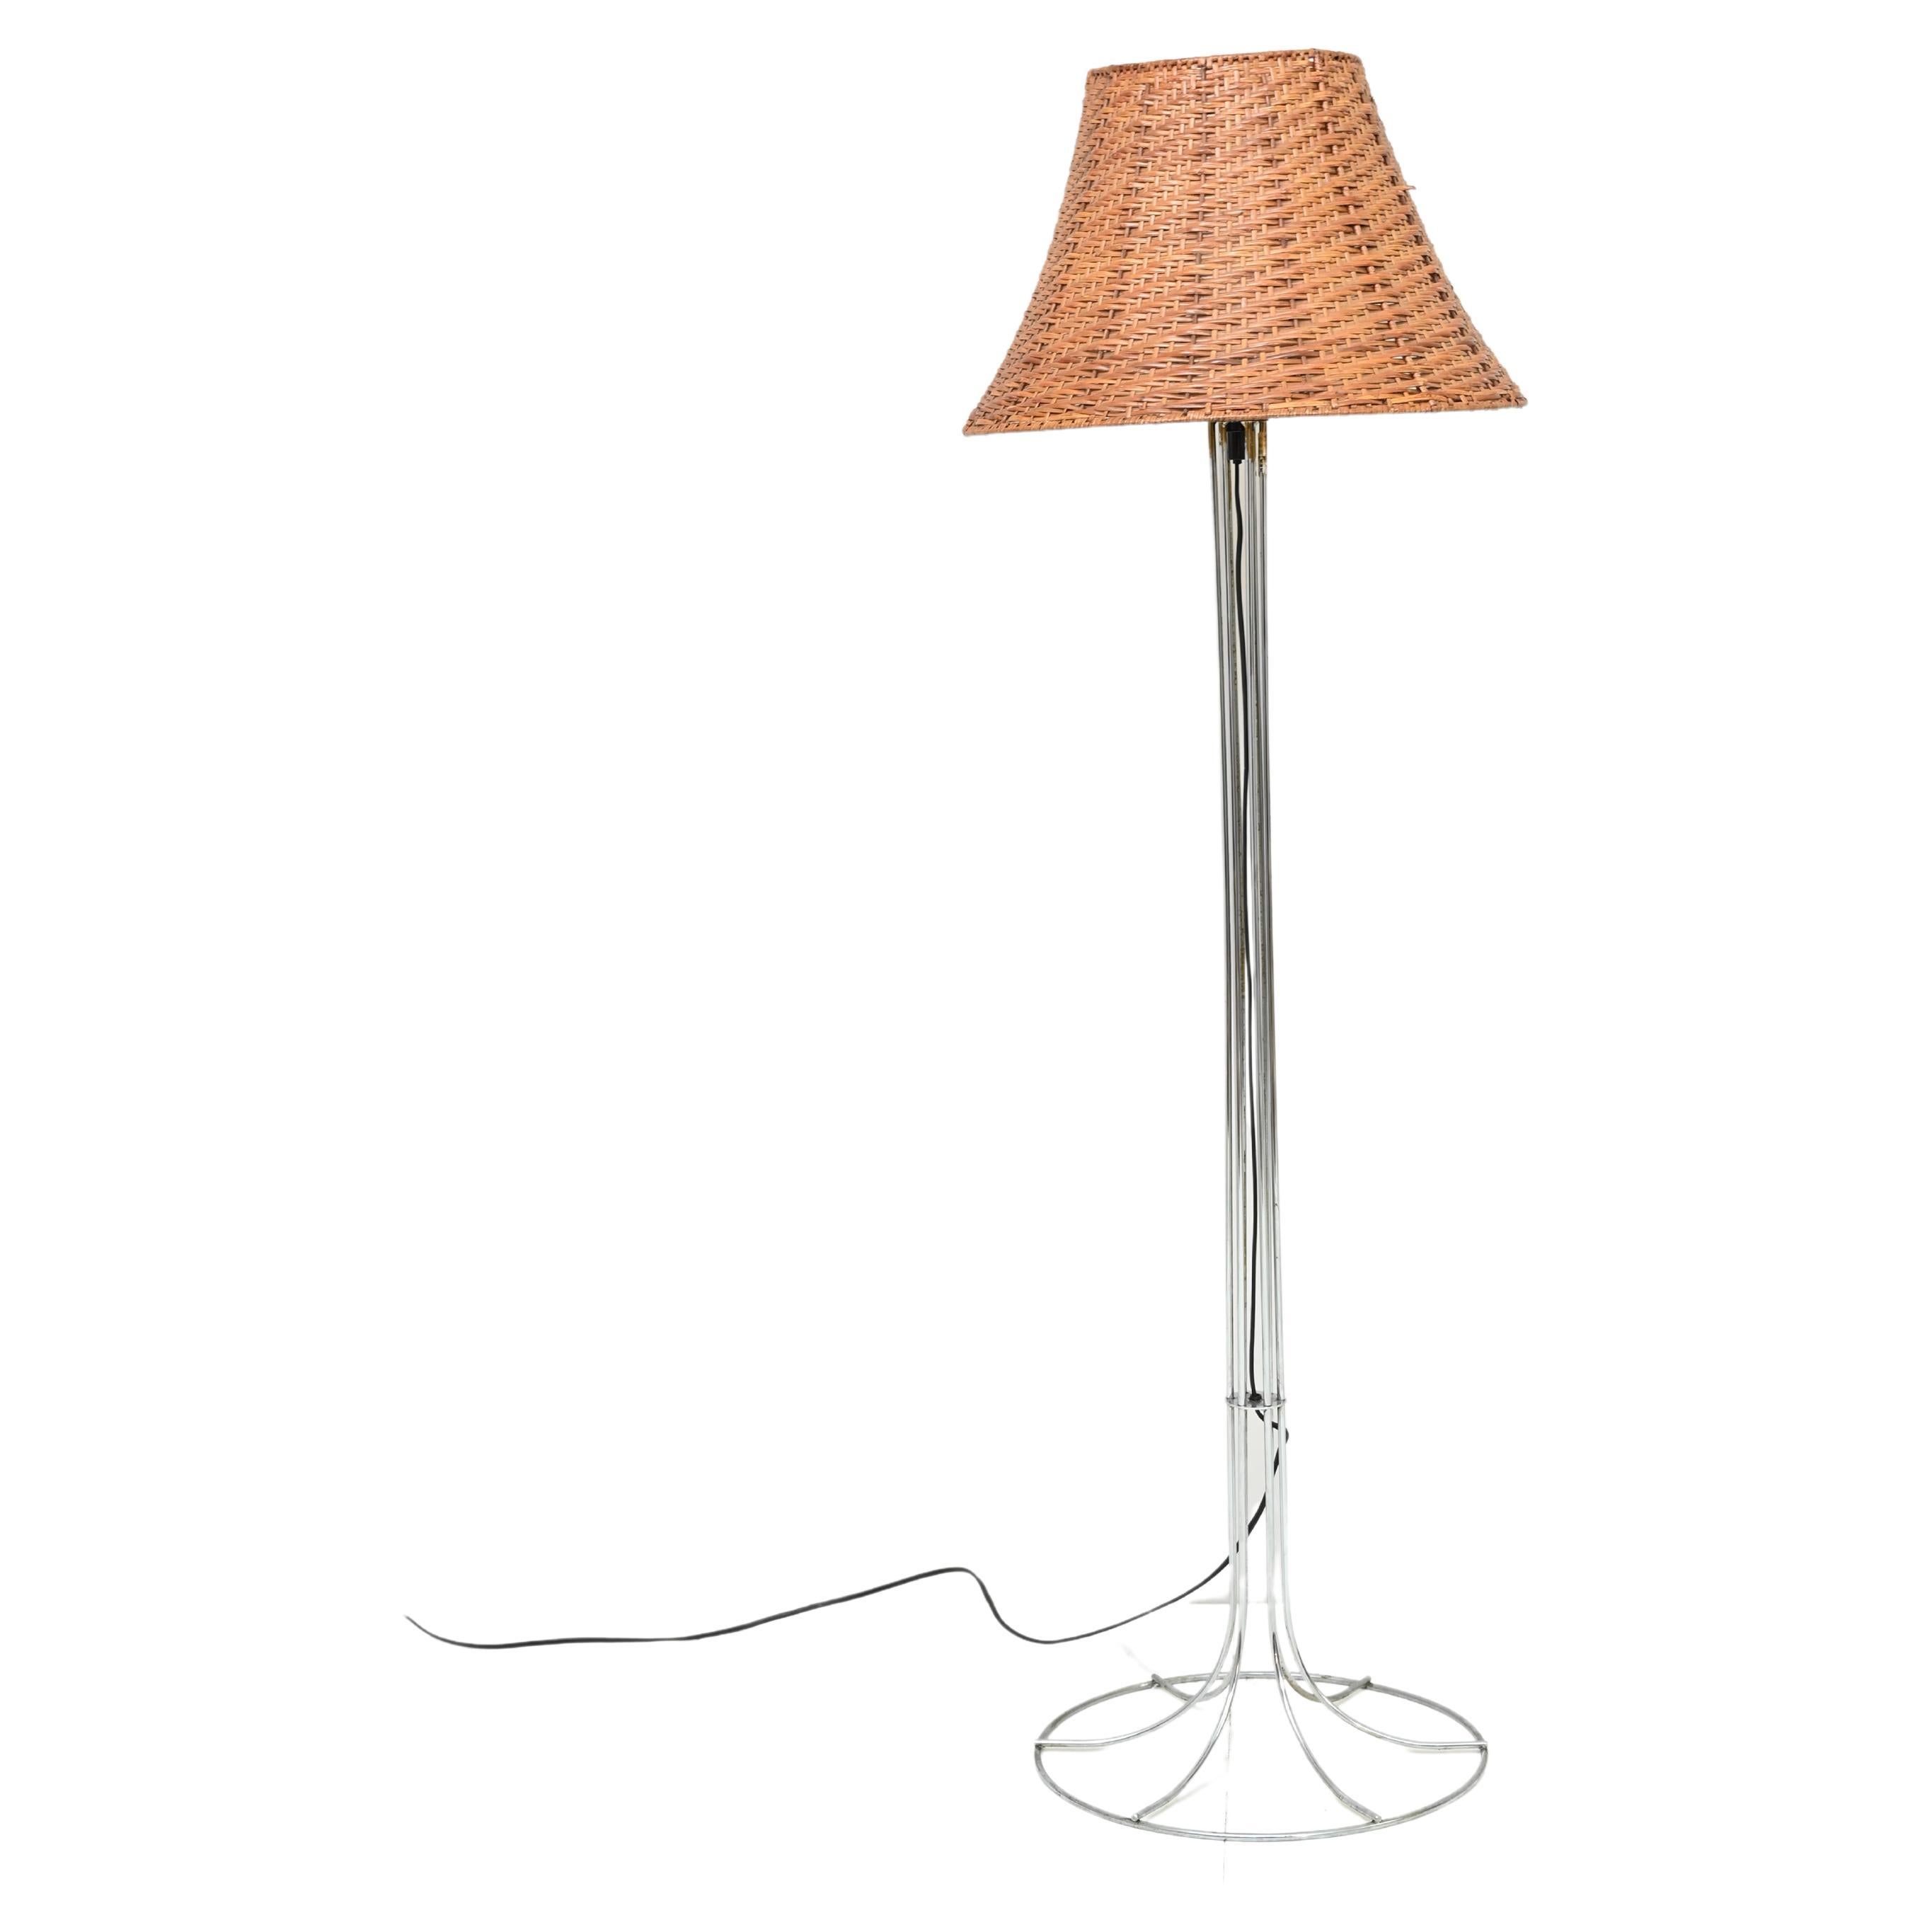 Floor lamp with a rattan lampshade For Sale